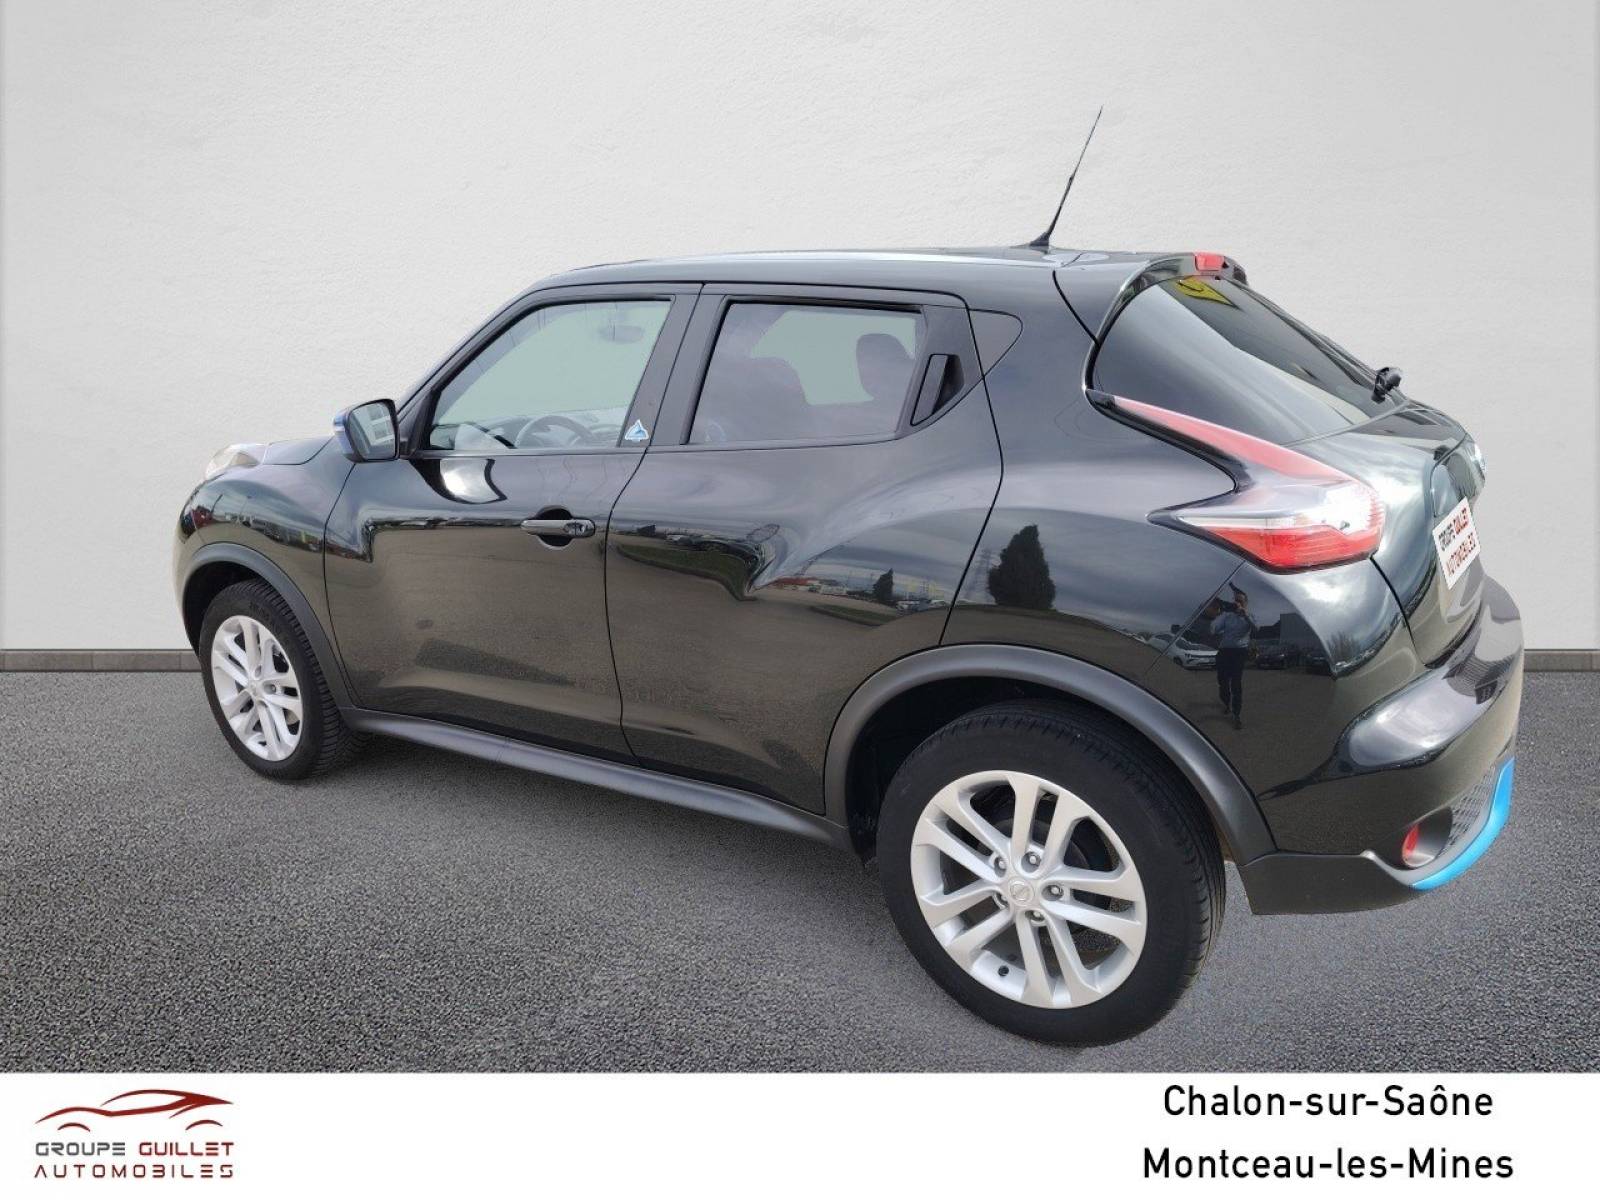 NISSAN Juke 1.2e DIG-T 115 Start/Stop System - véhicule d'occasion - Groupe Guillet - Opel Magicauto Chalon - 71380 - Saint-Marcel - 7